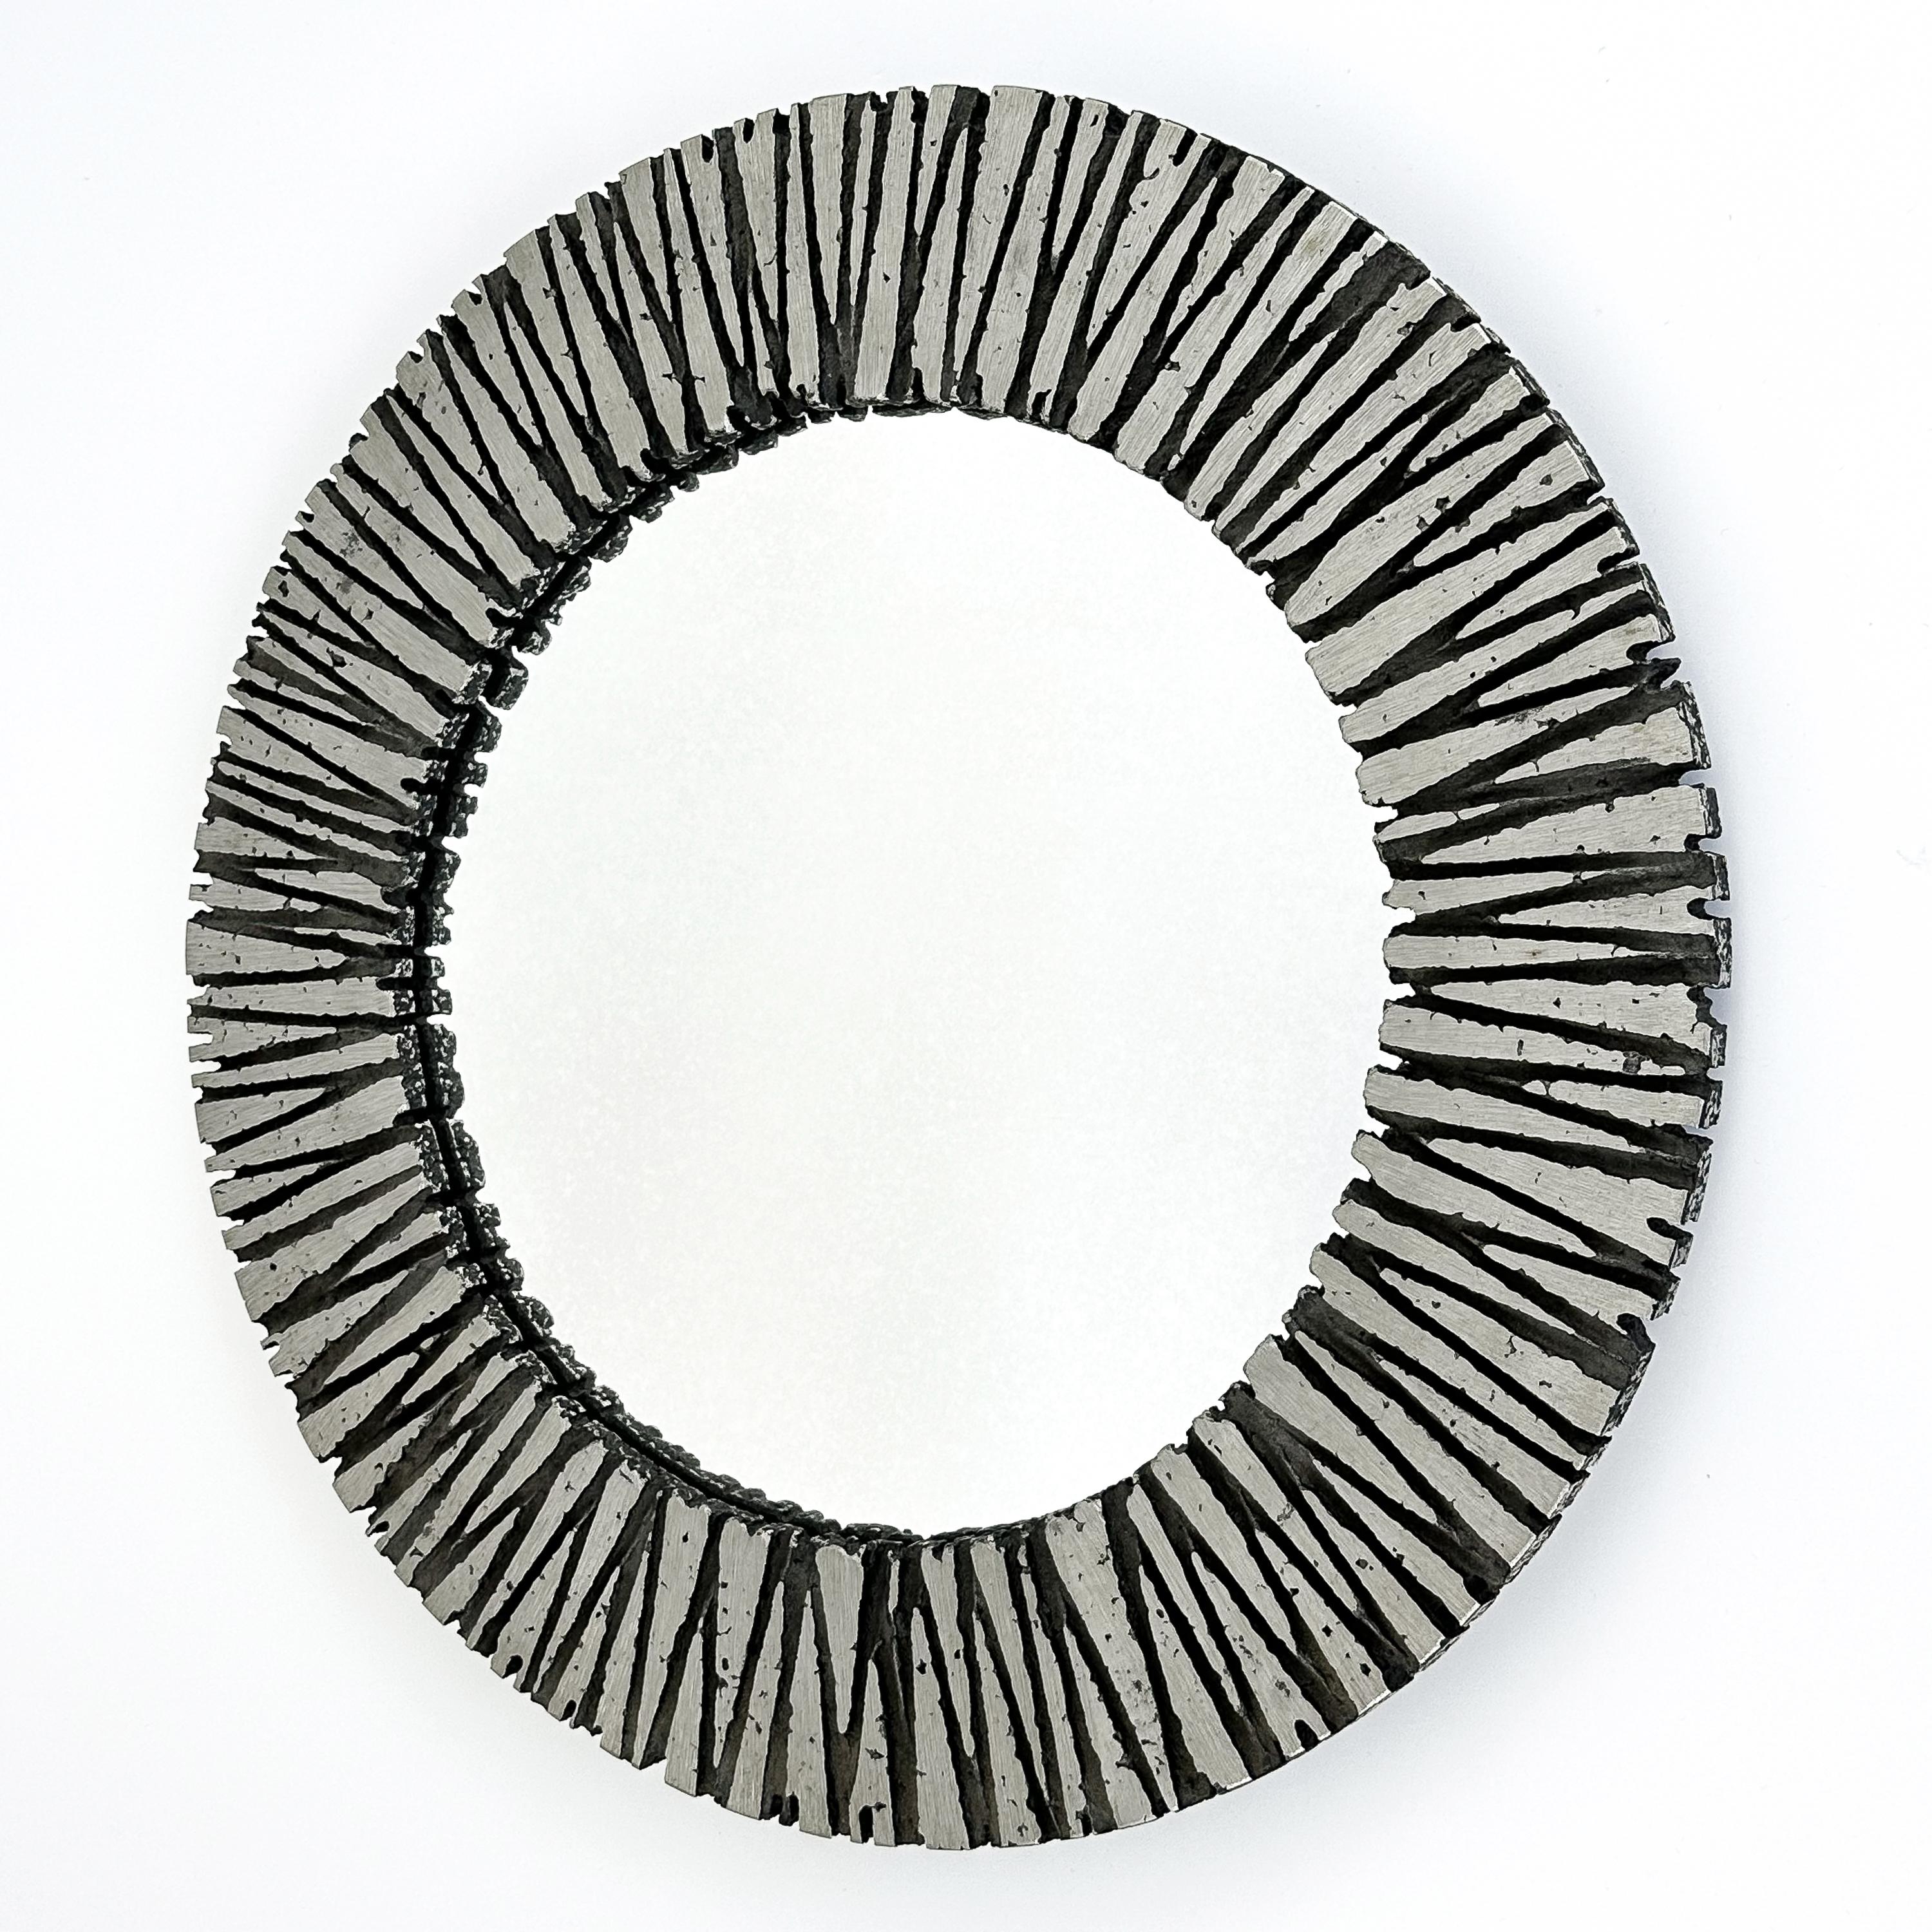 This Willy Ceysens (1929-2007) Brutalist round wall mirror is a striking example of the innovative design and craftsmanship that characterized the 1960s. Originating from Belgium, the piece is framed in solid aluminum, a material that Ceysens, an